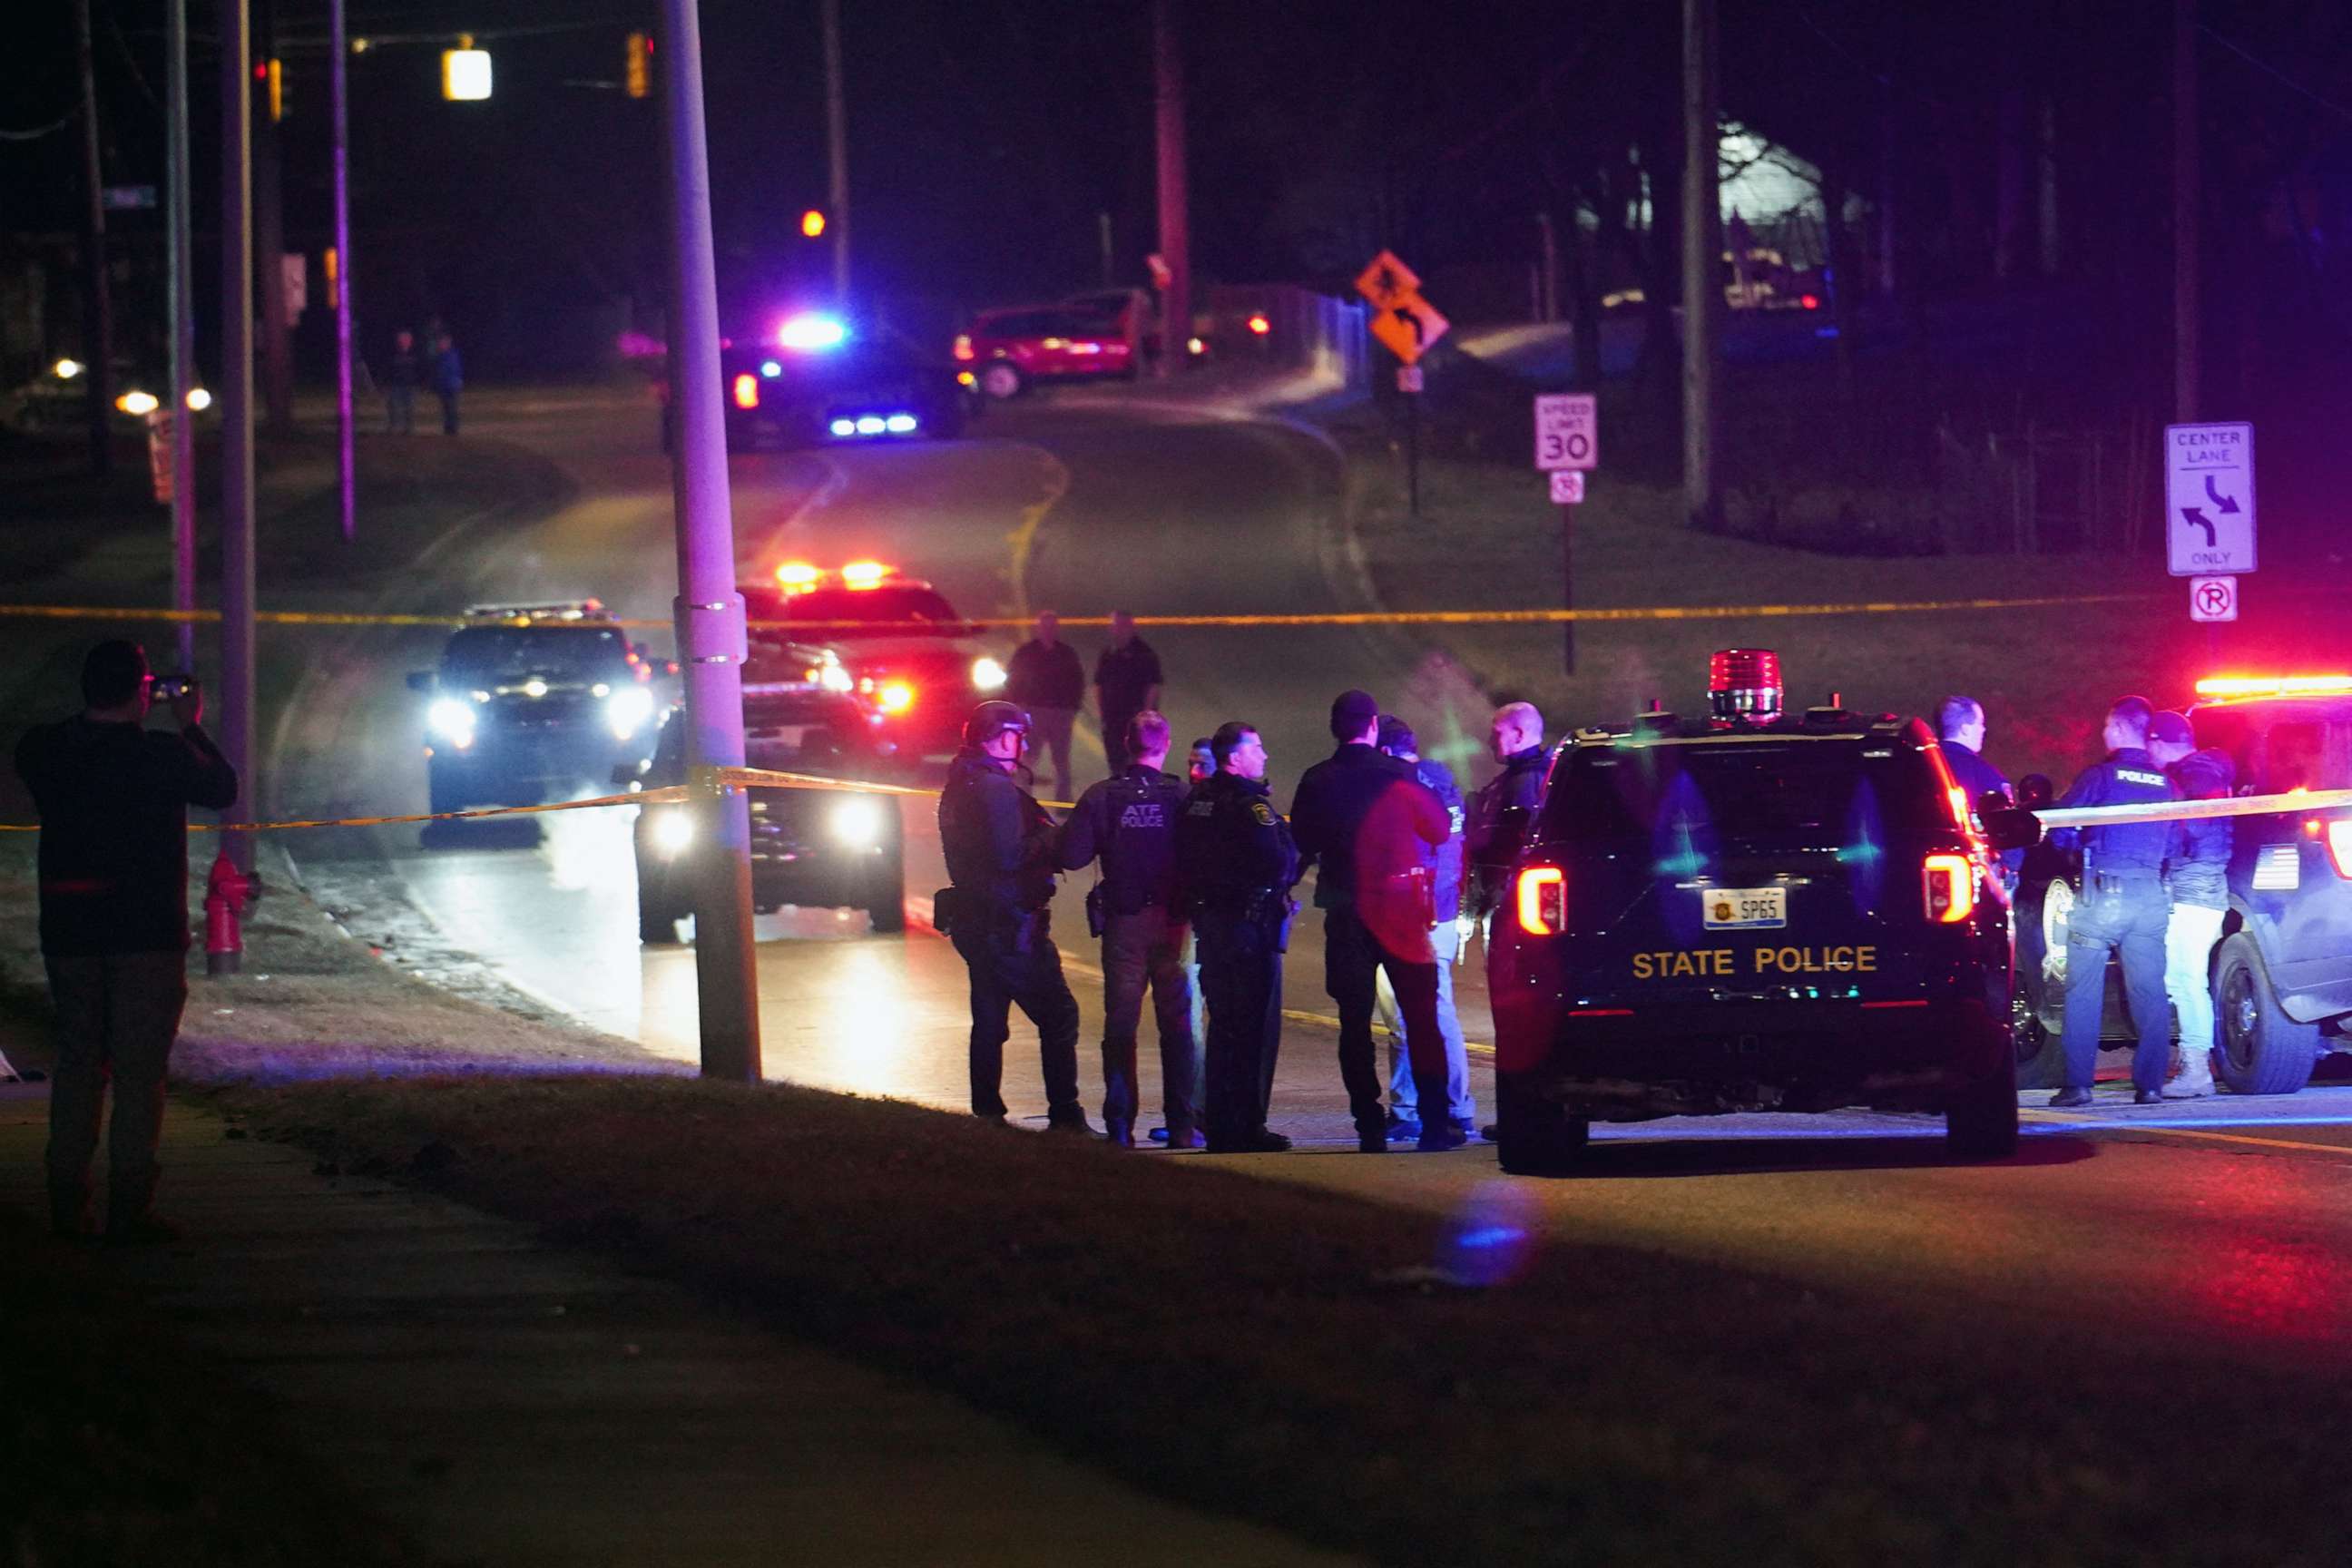 PHOTO: Police officers surround a scene where the suspect was located as they respond to a shooting at Michigan State University in East Lansing, Mich., Feb. 14, 2023.